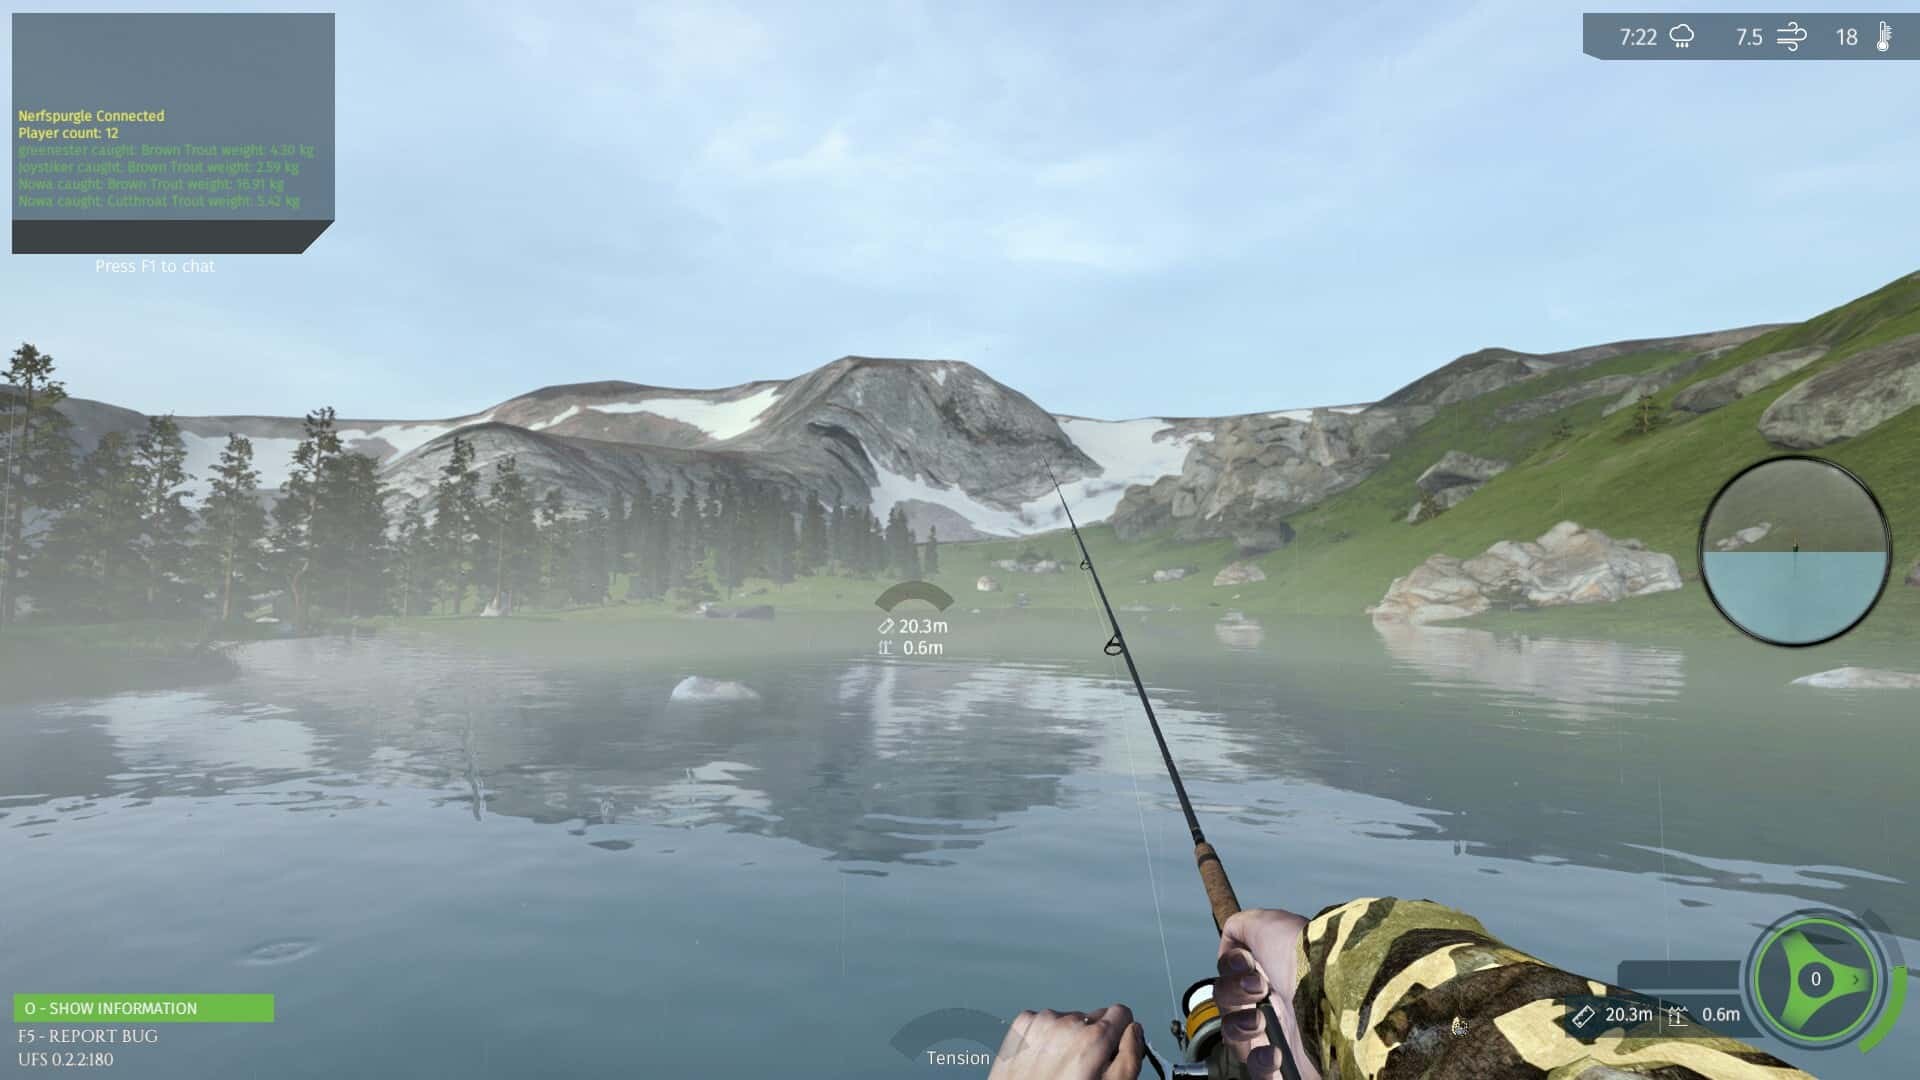 Dad on a Budget: Ultimate Fishing Simulator Review 